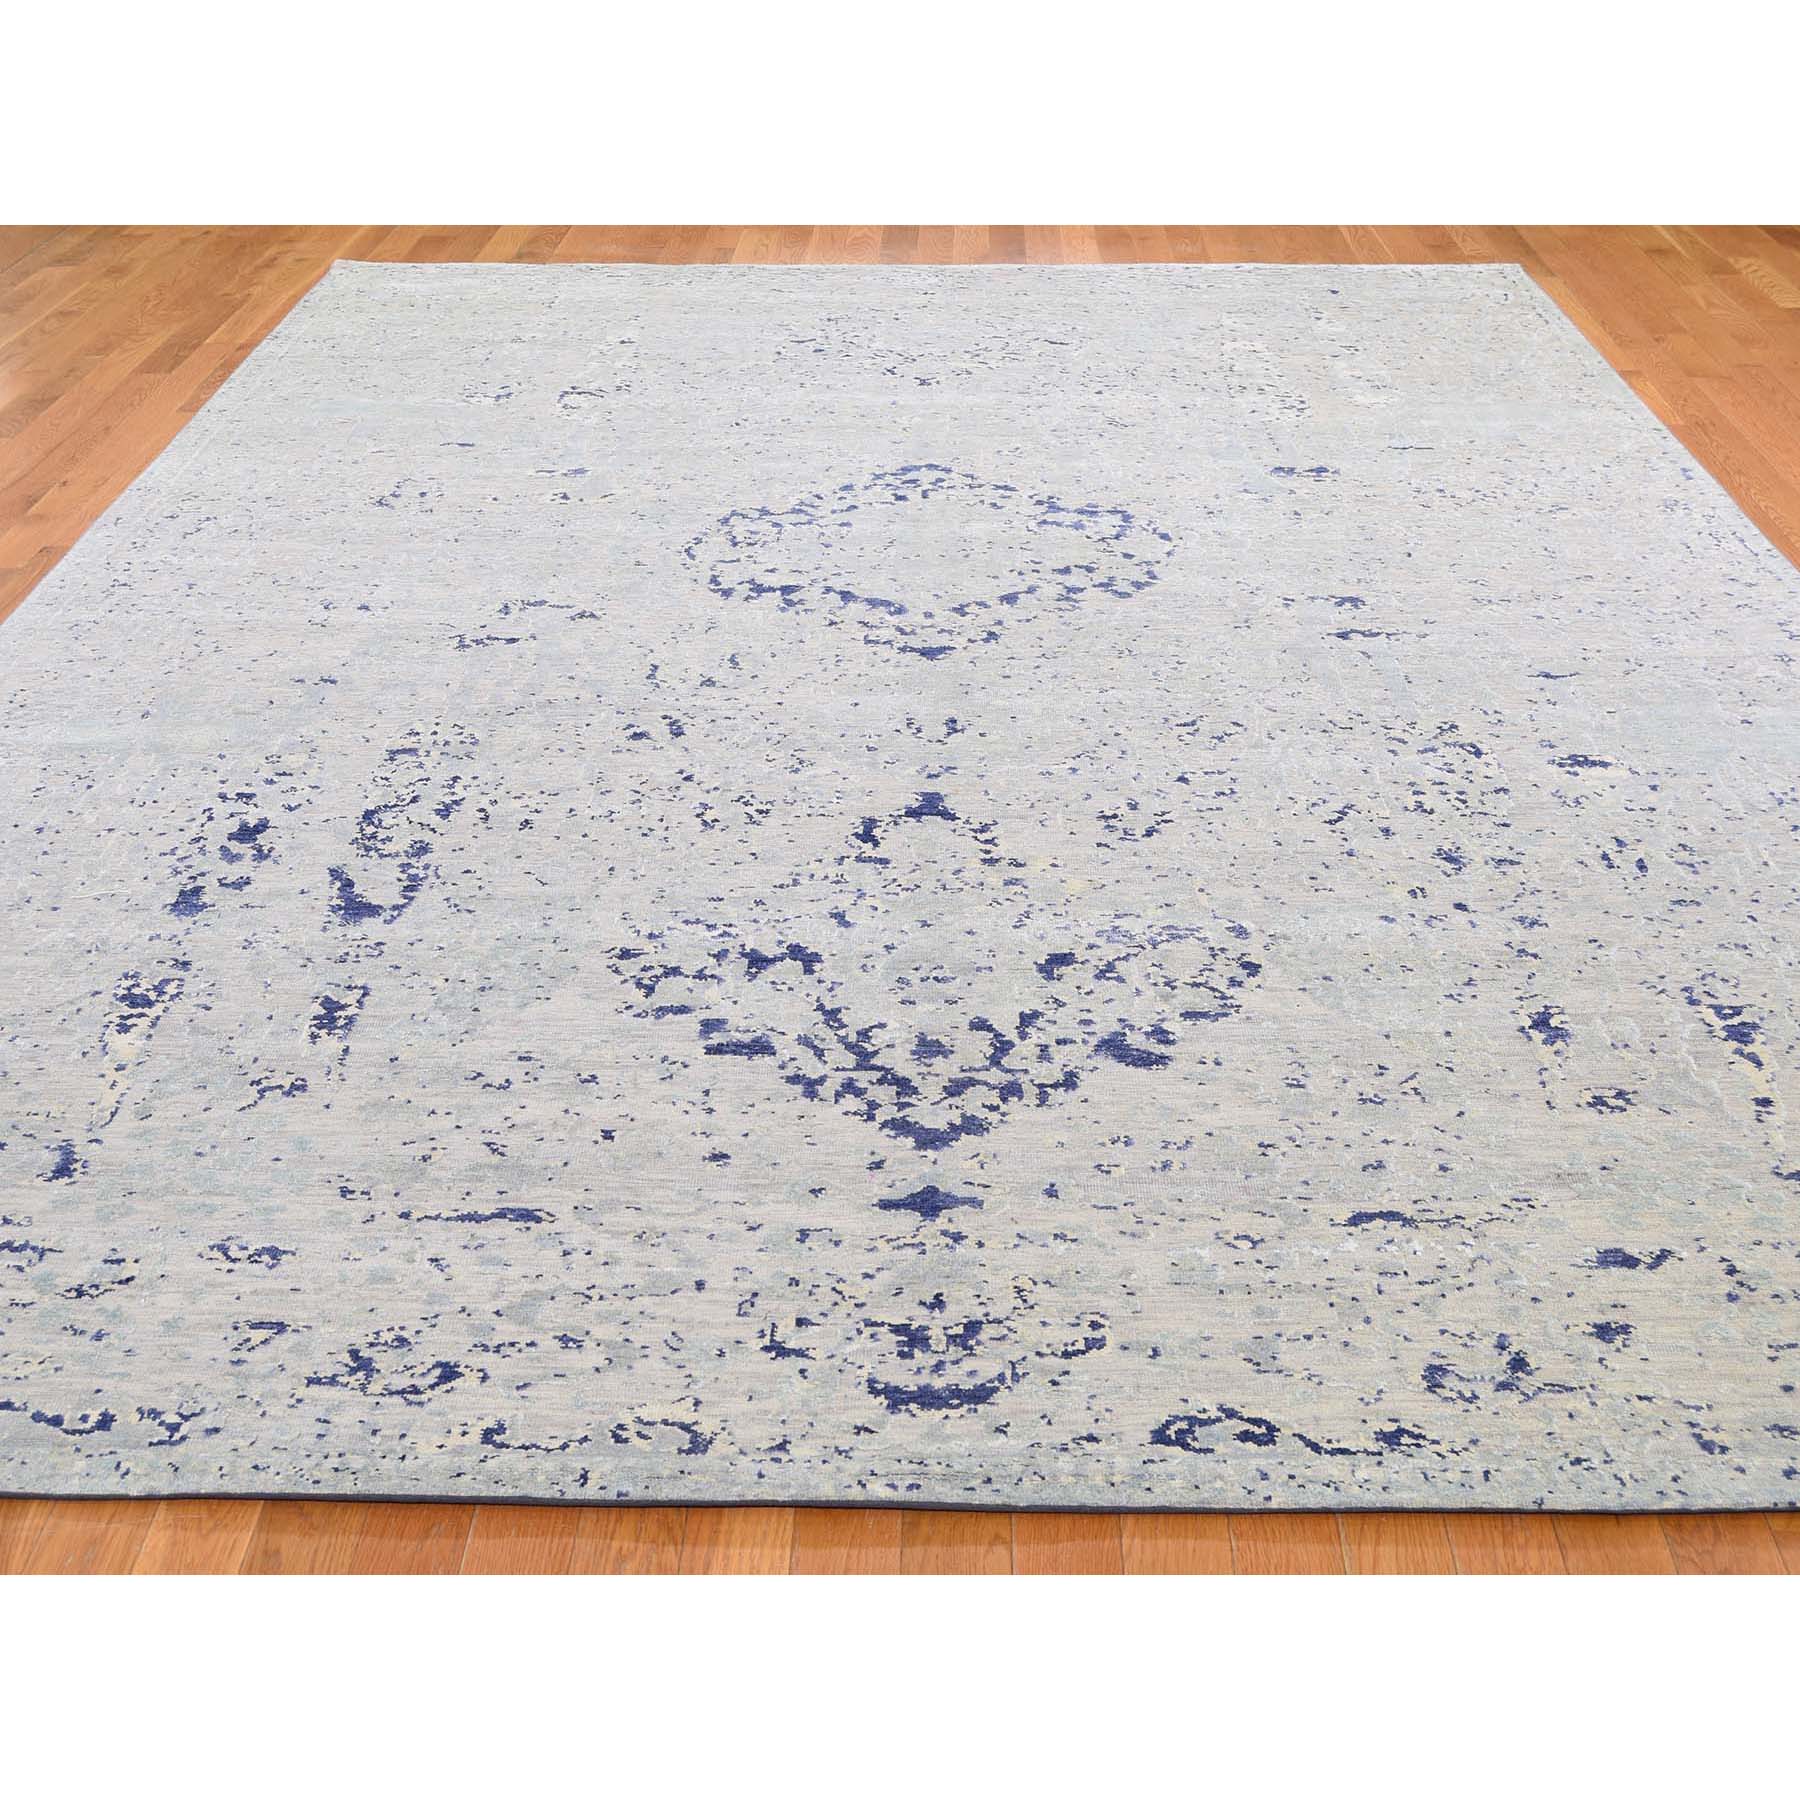 8-9 x12-1  Diminishing Cypress Tree With Medallion Design Silk With Textured Wool Hand-Knotted Oriental Rug 